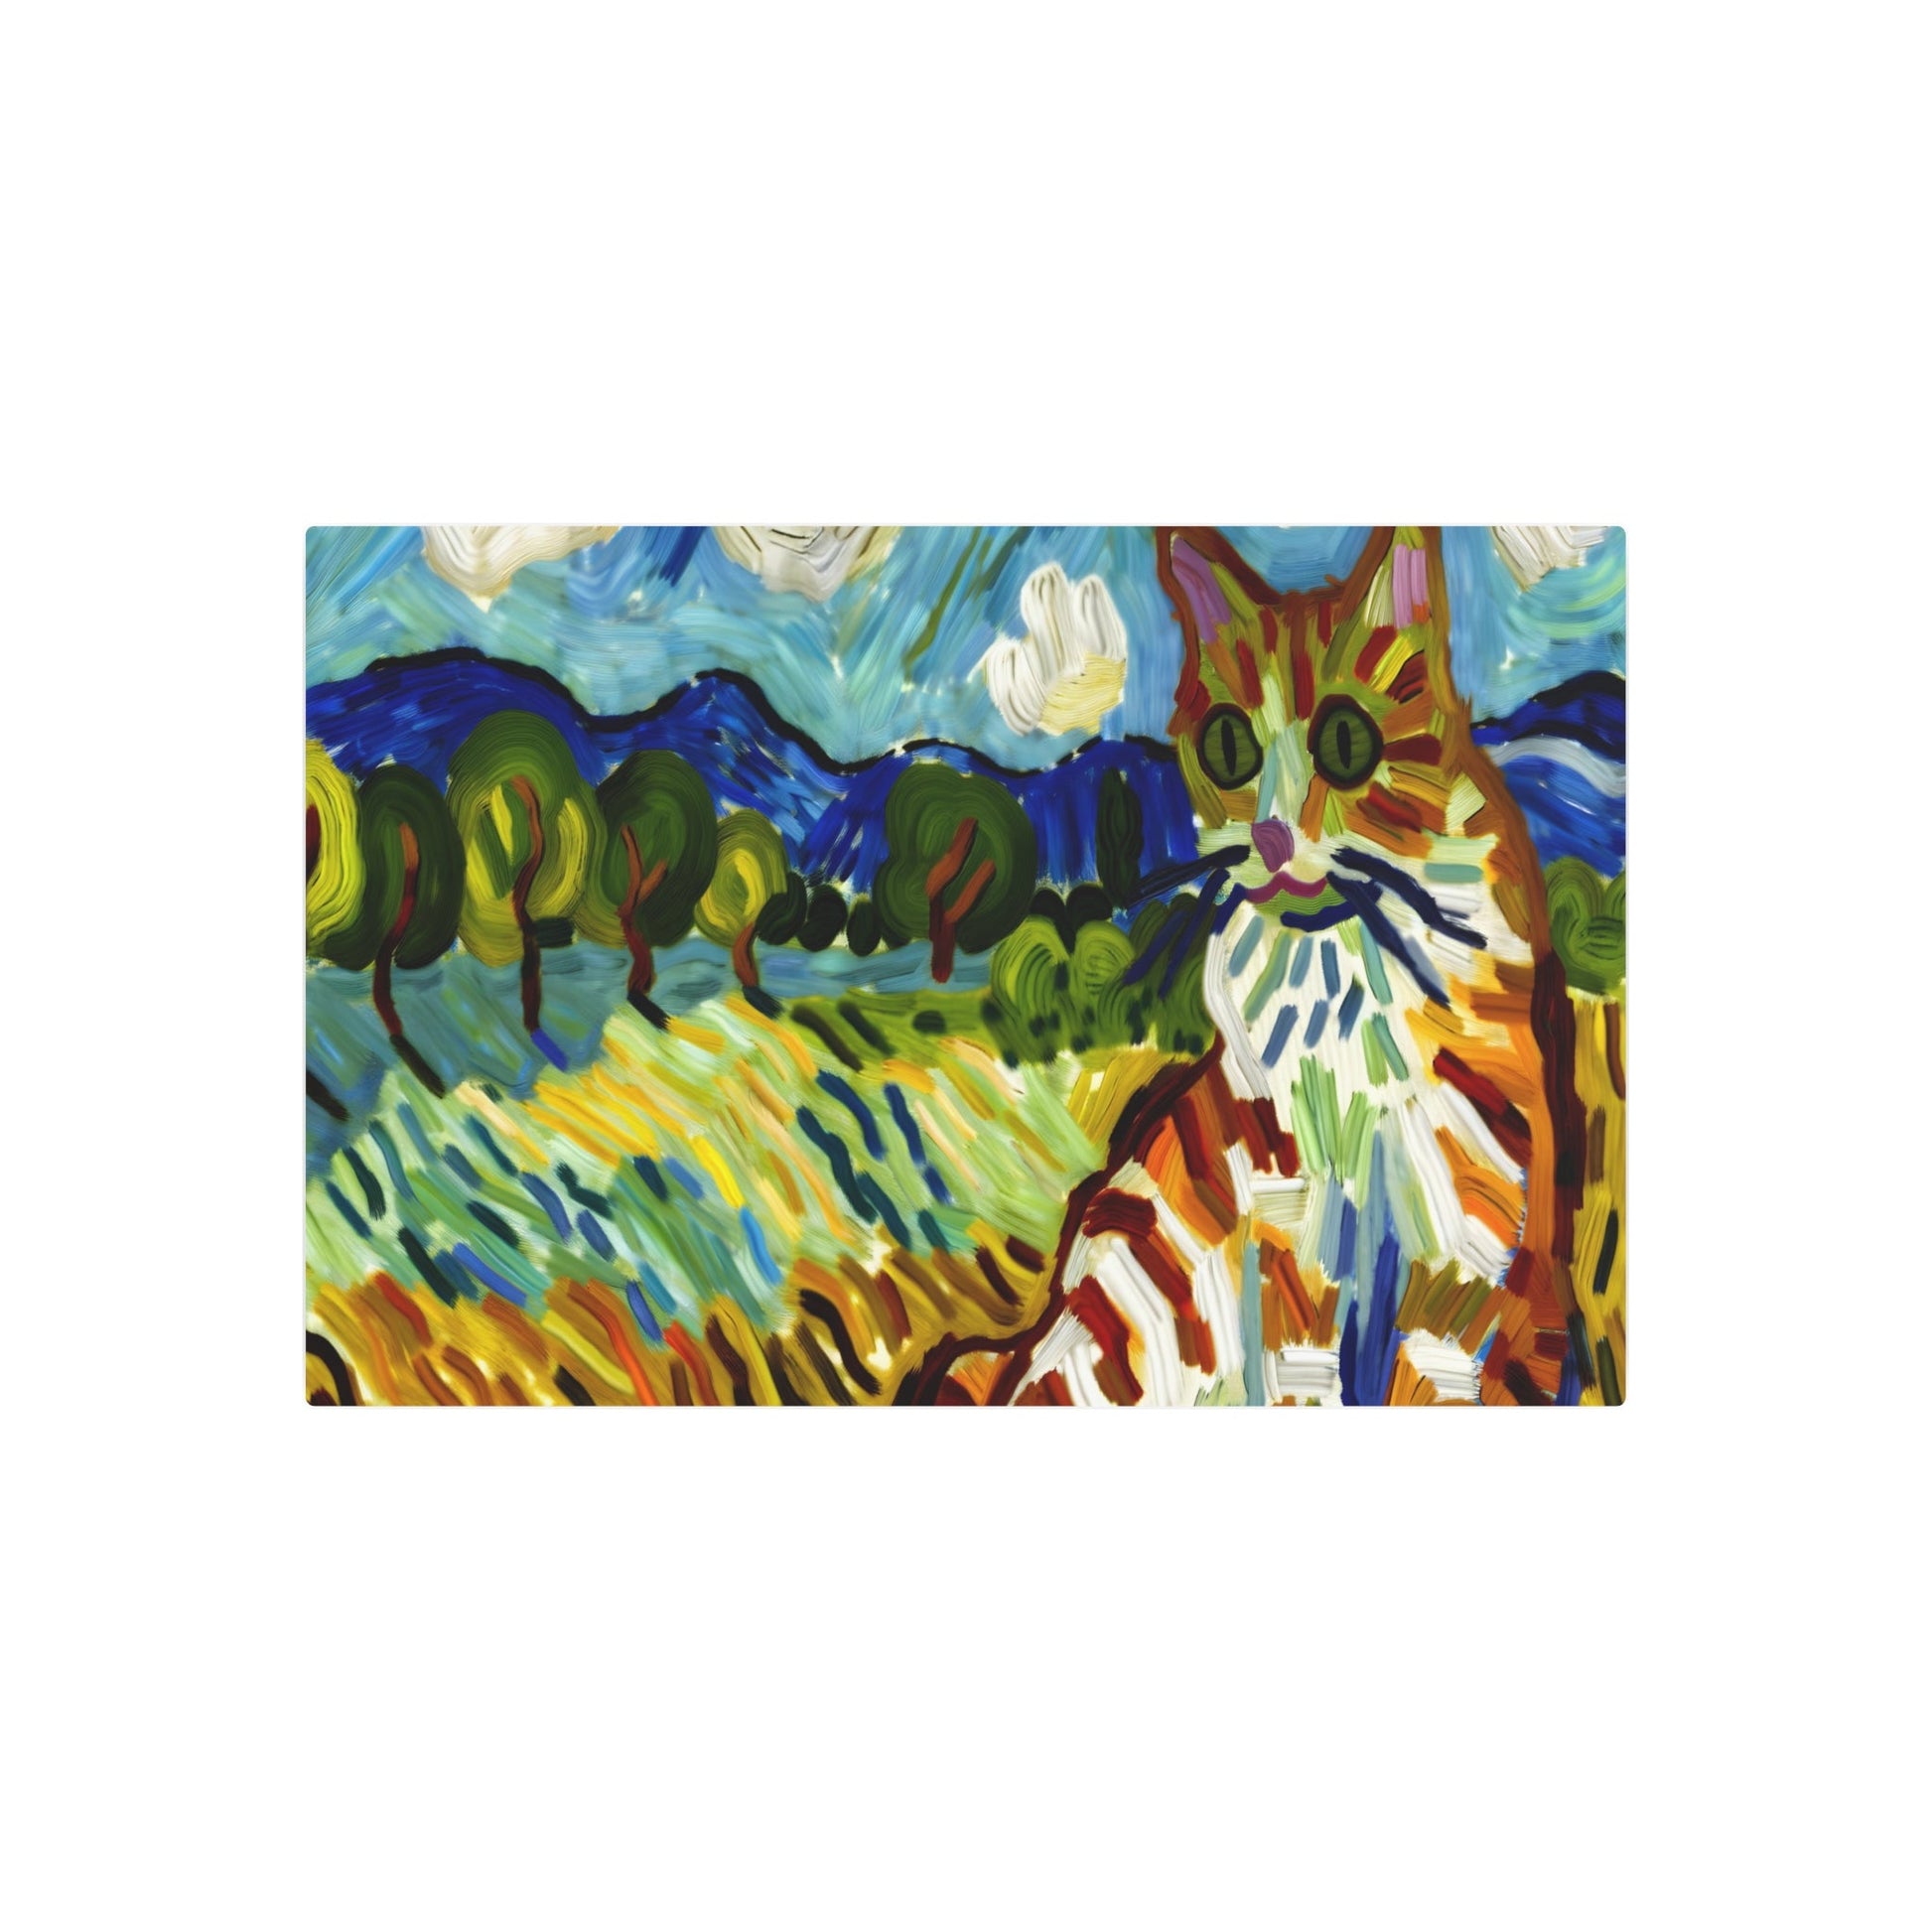 Metal Poster Art | "Post-Impressionism Inspired Colorful Cat Landscape - Western Art Styles Collection" - Metal Poster Art 36″ x 24″ (Horizontal) 0.12''